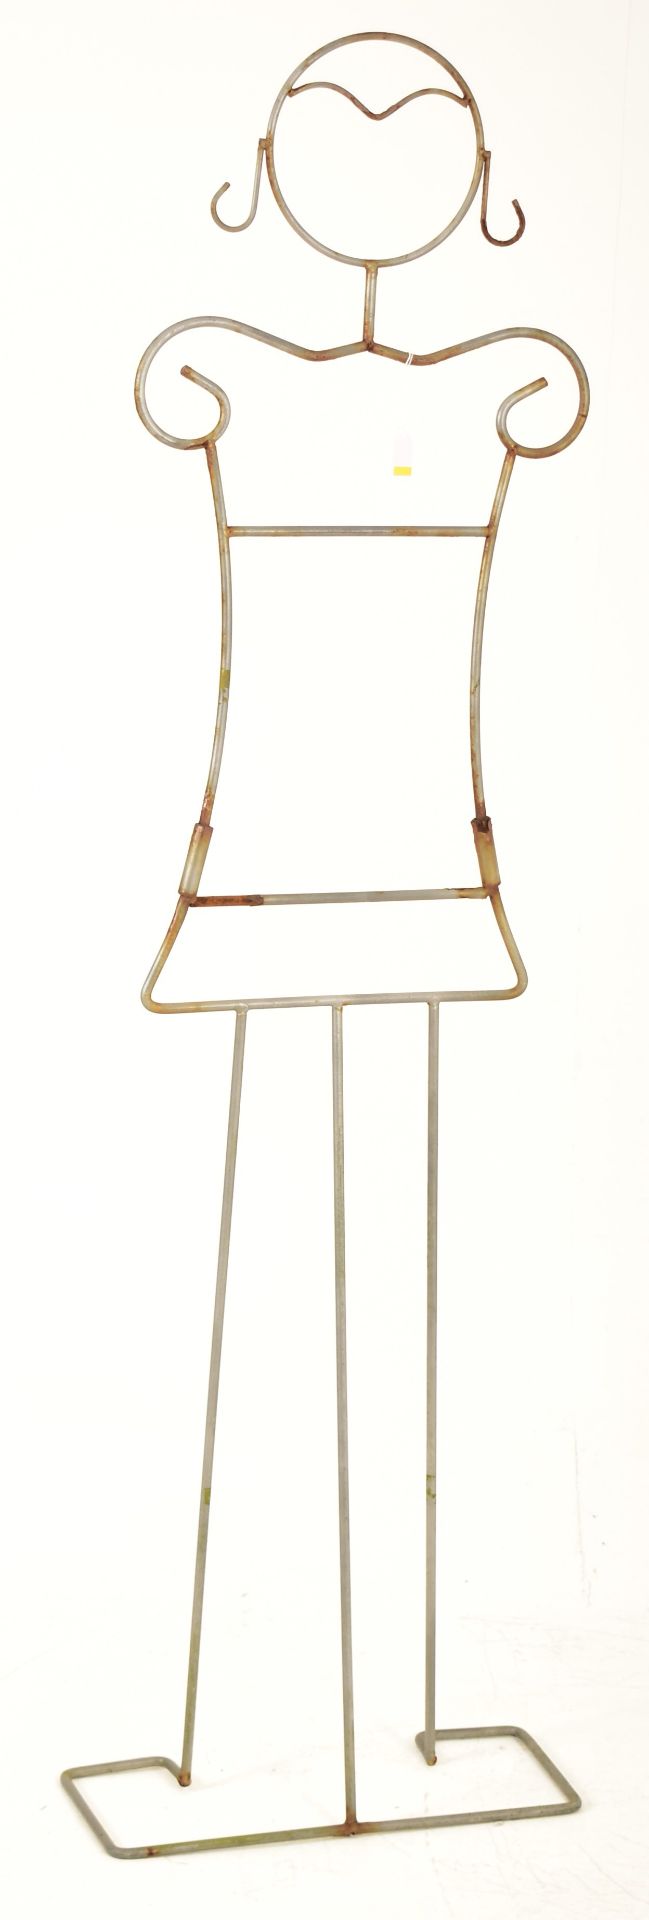 VINTAGE MID 20TH CENTURY SHOP DISPLAY / VALET MANNEQUIN STAND - Image 4 of 4